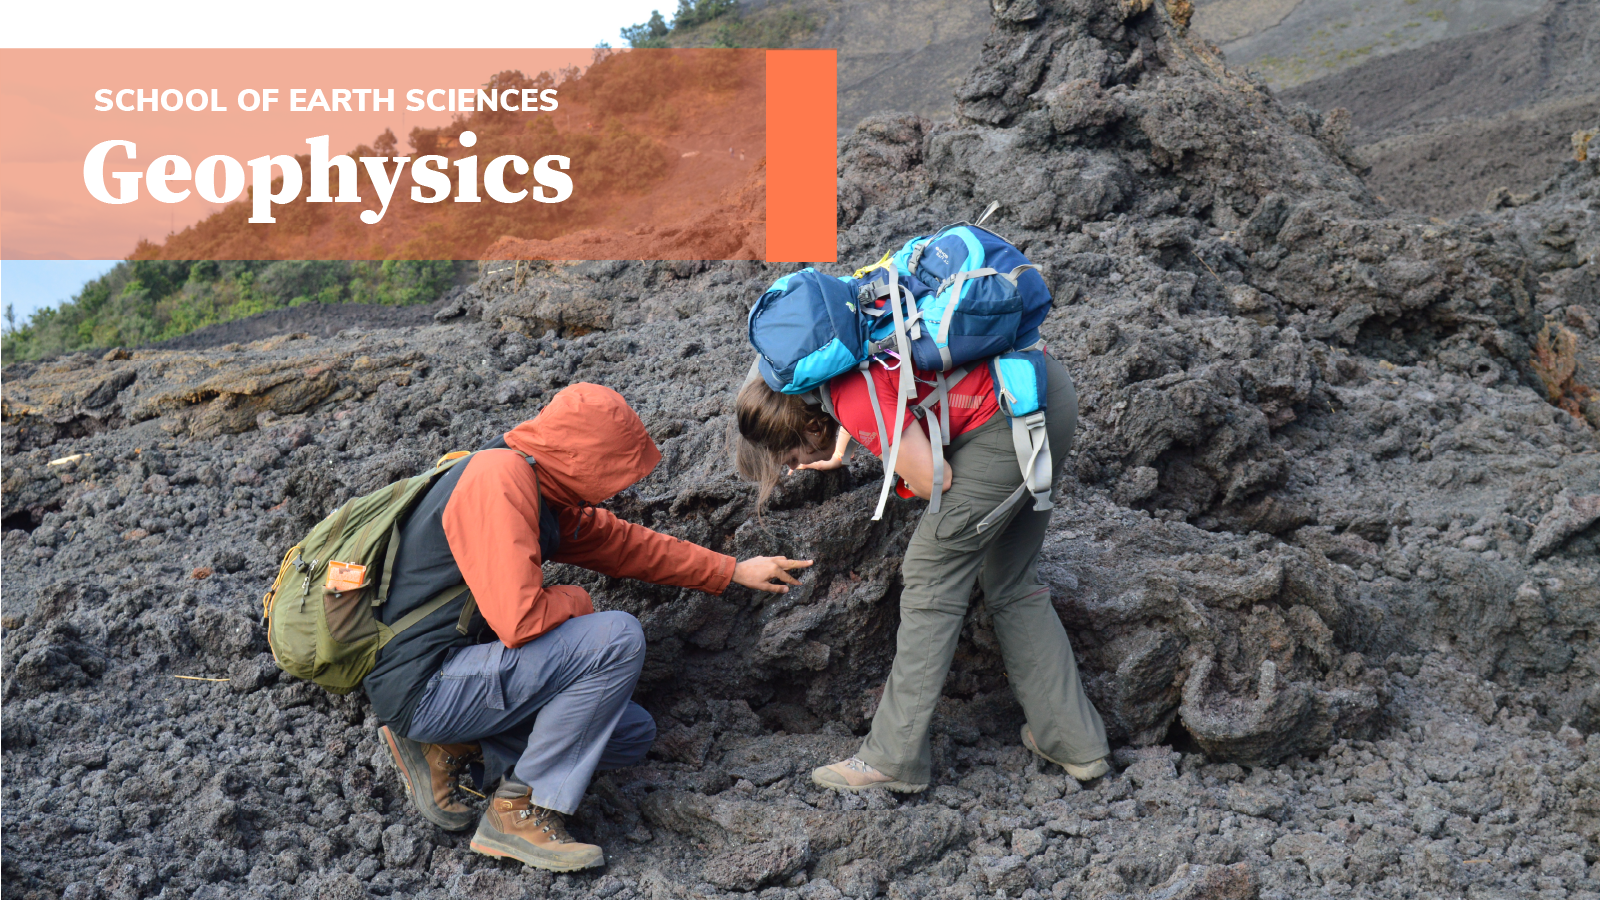 A pair of students inspect hardened lava fields and an orange banner reading "Geophysics" is above them